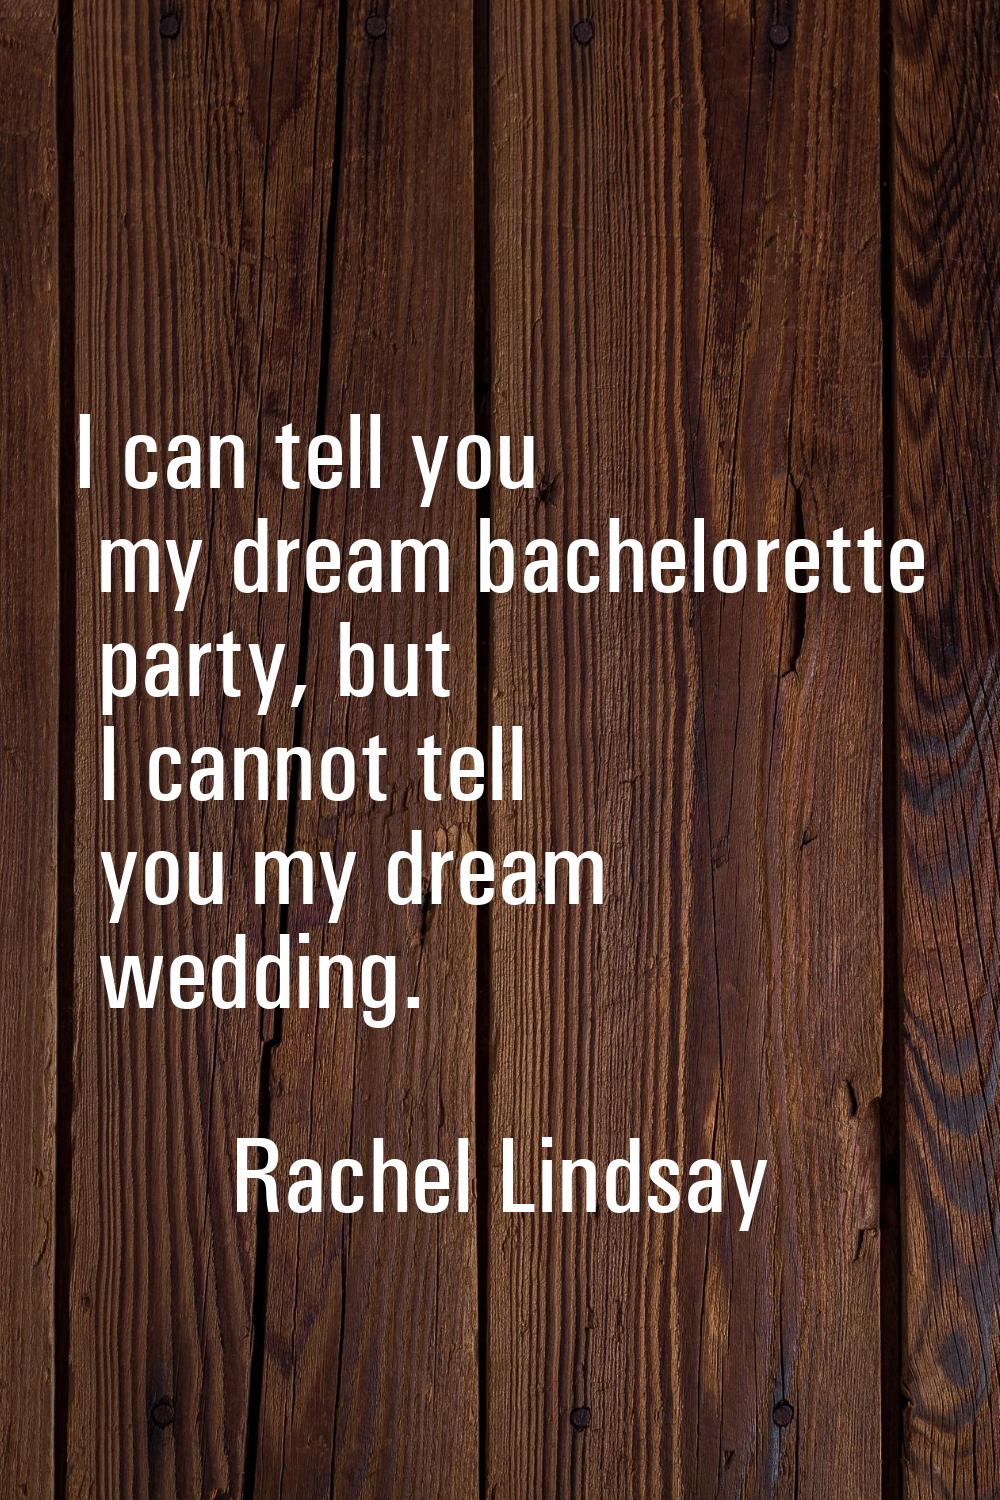 I can tell you my dream bachelorette party, but I cannot tell you my dream wedding.